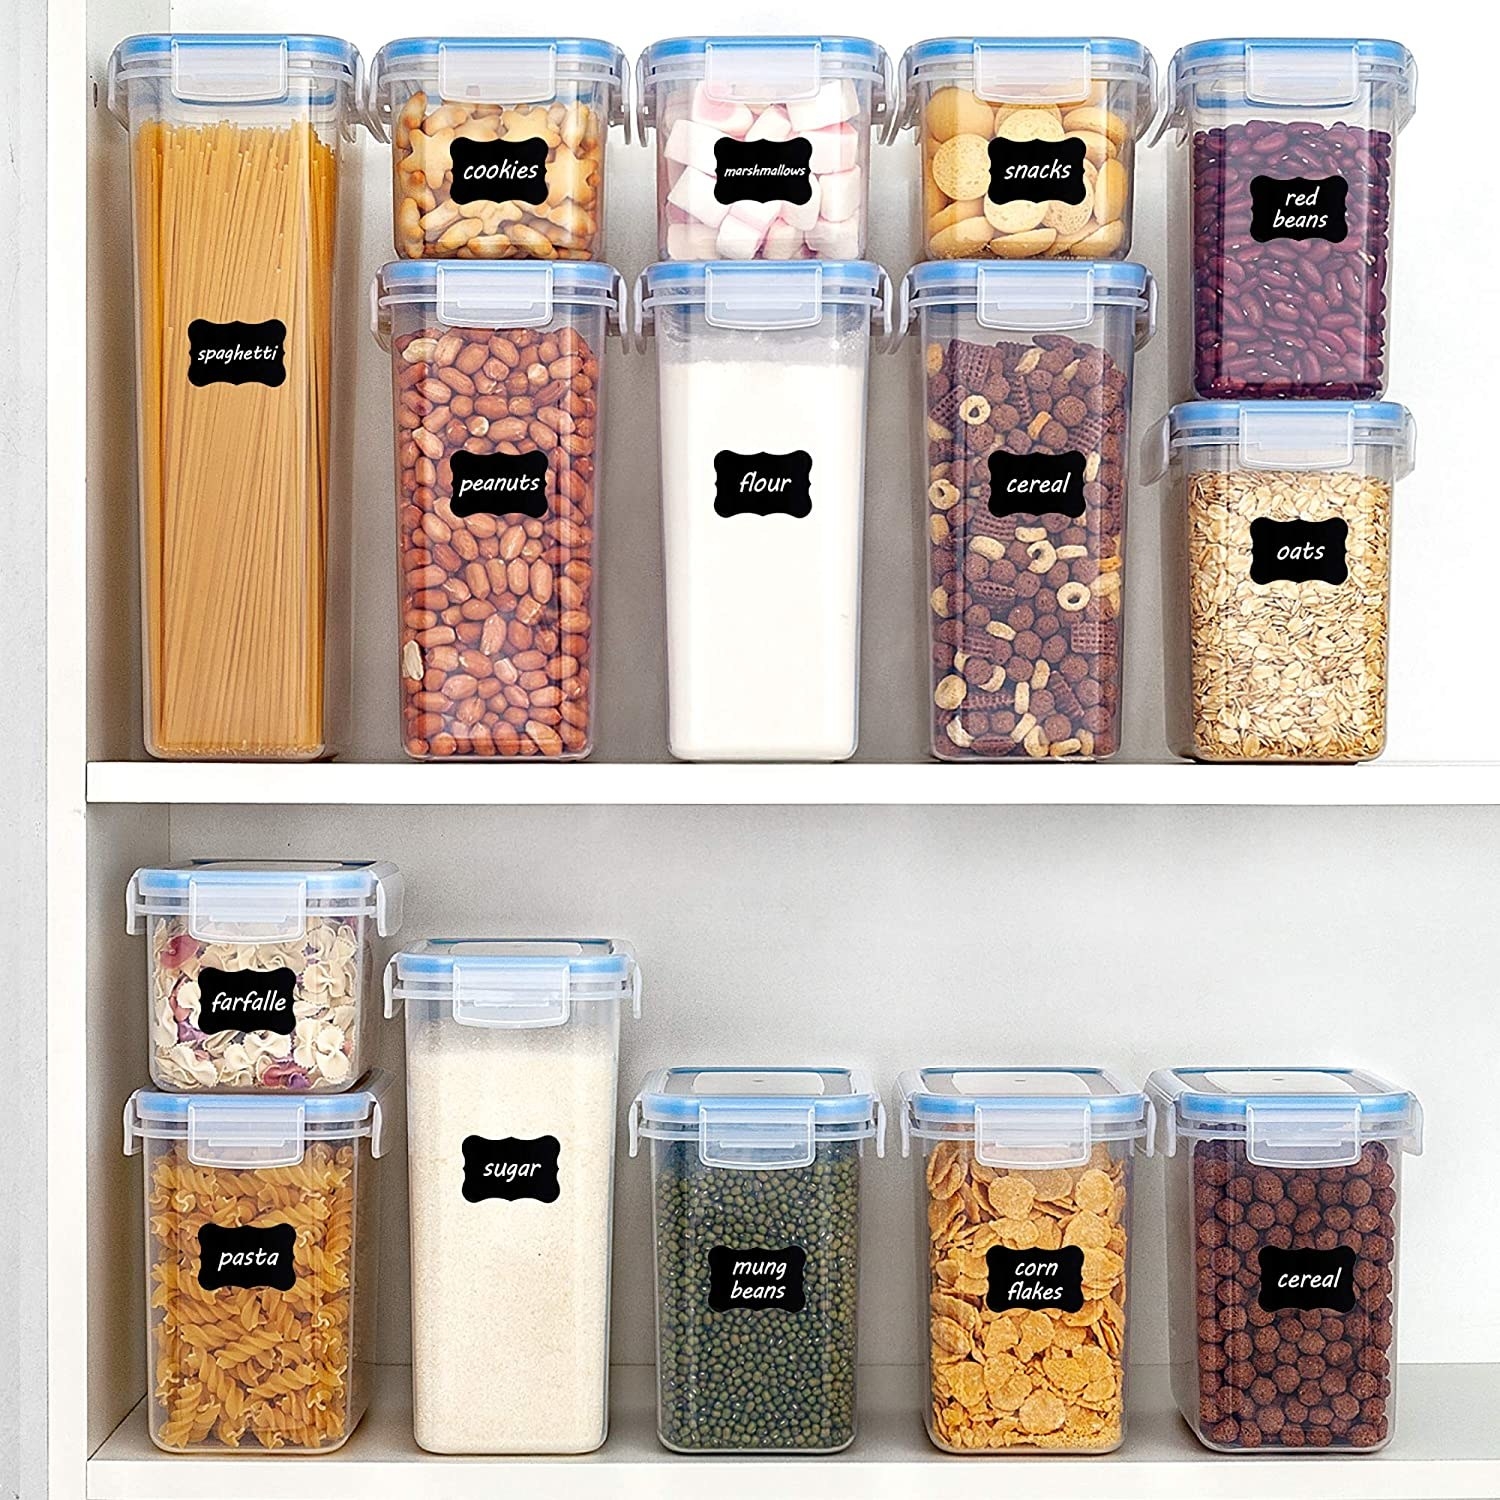 The food storage containers in a cabinet